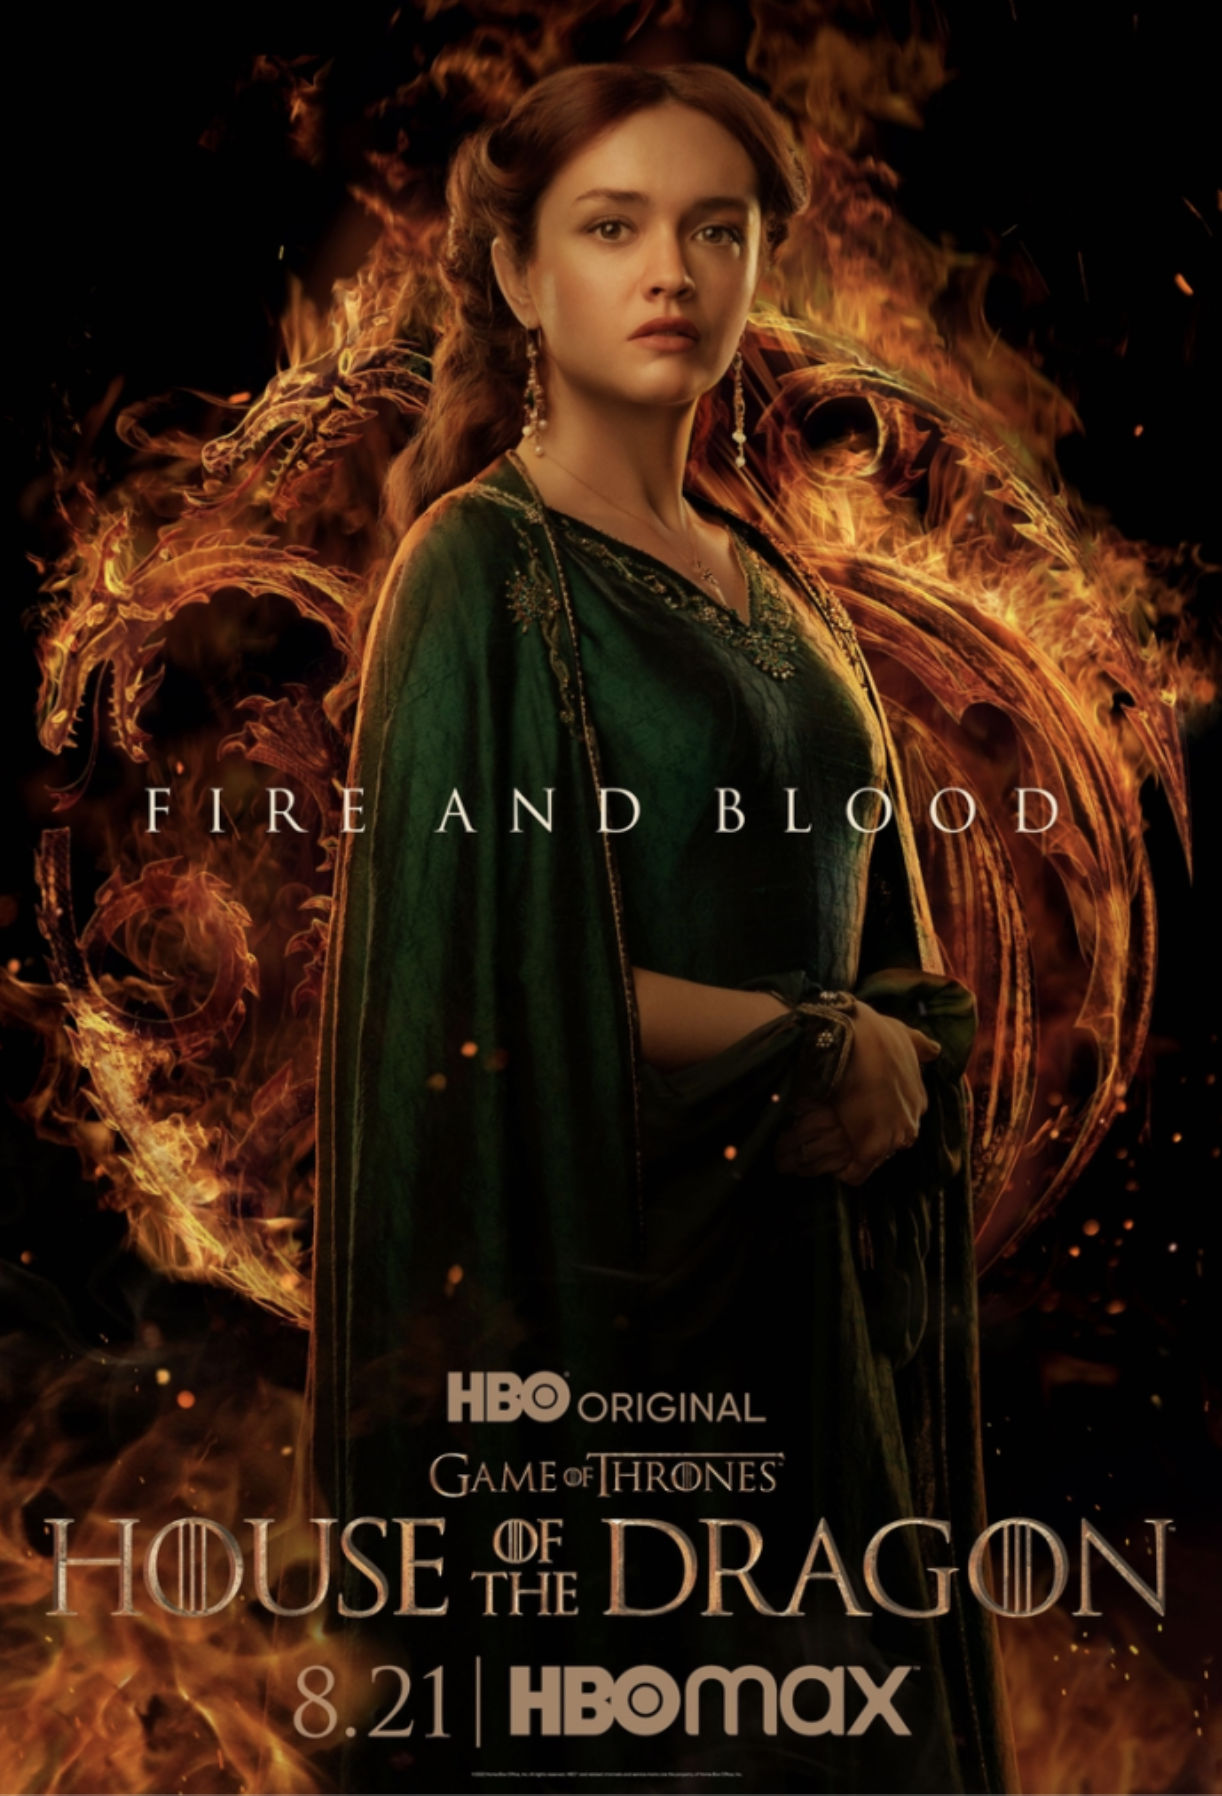 HBO releases a NEW poster for the video game turned TV series 'The